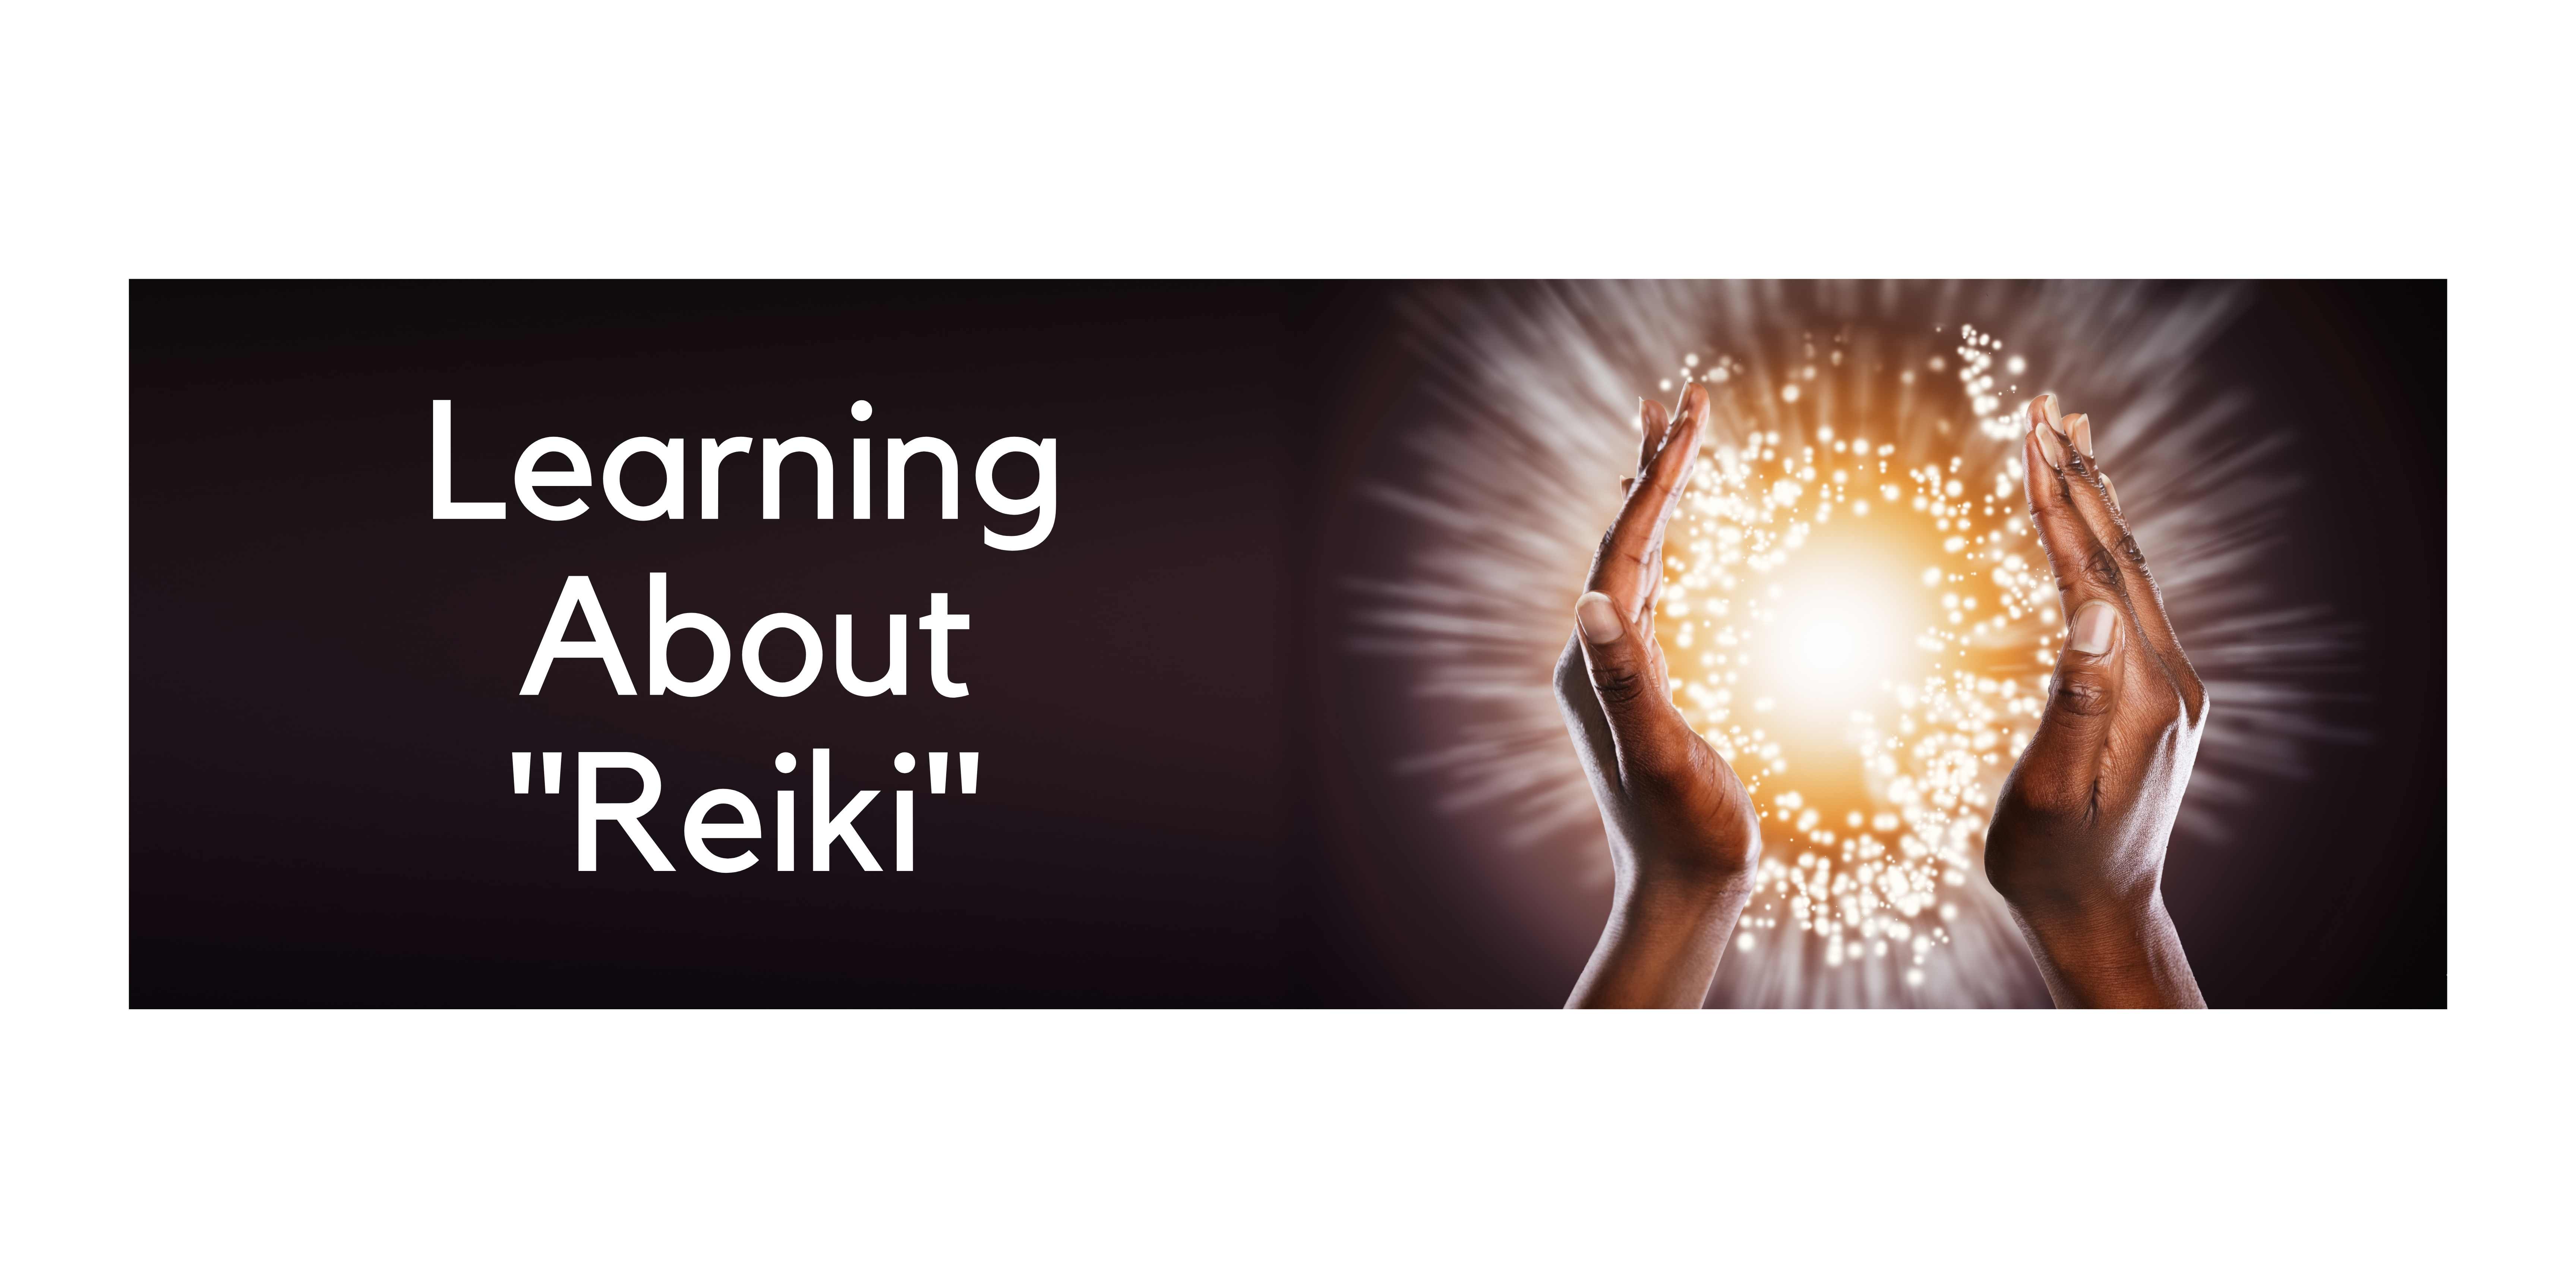 Learning About Reiki - All You Should Know